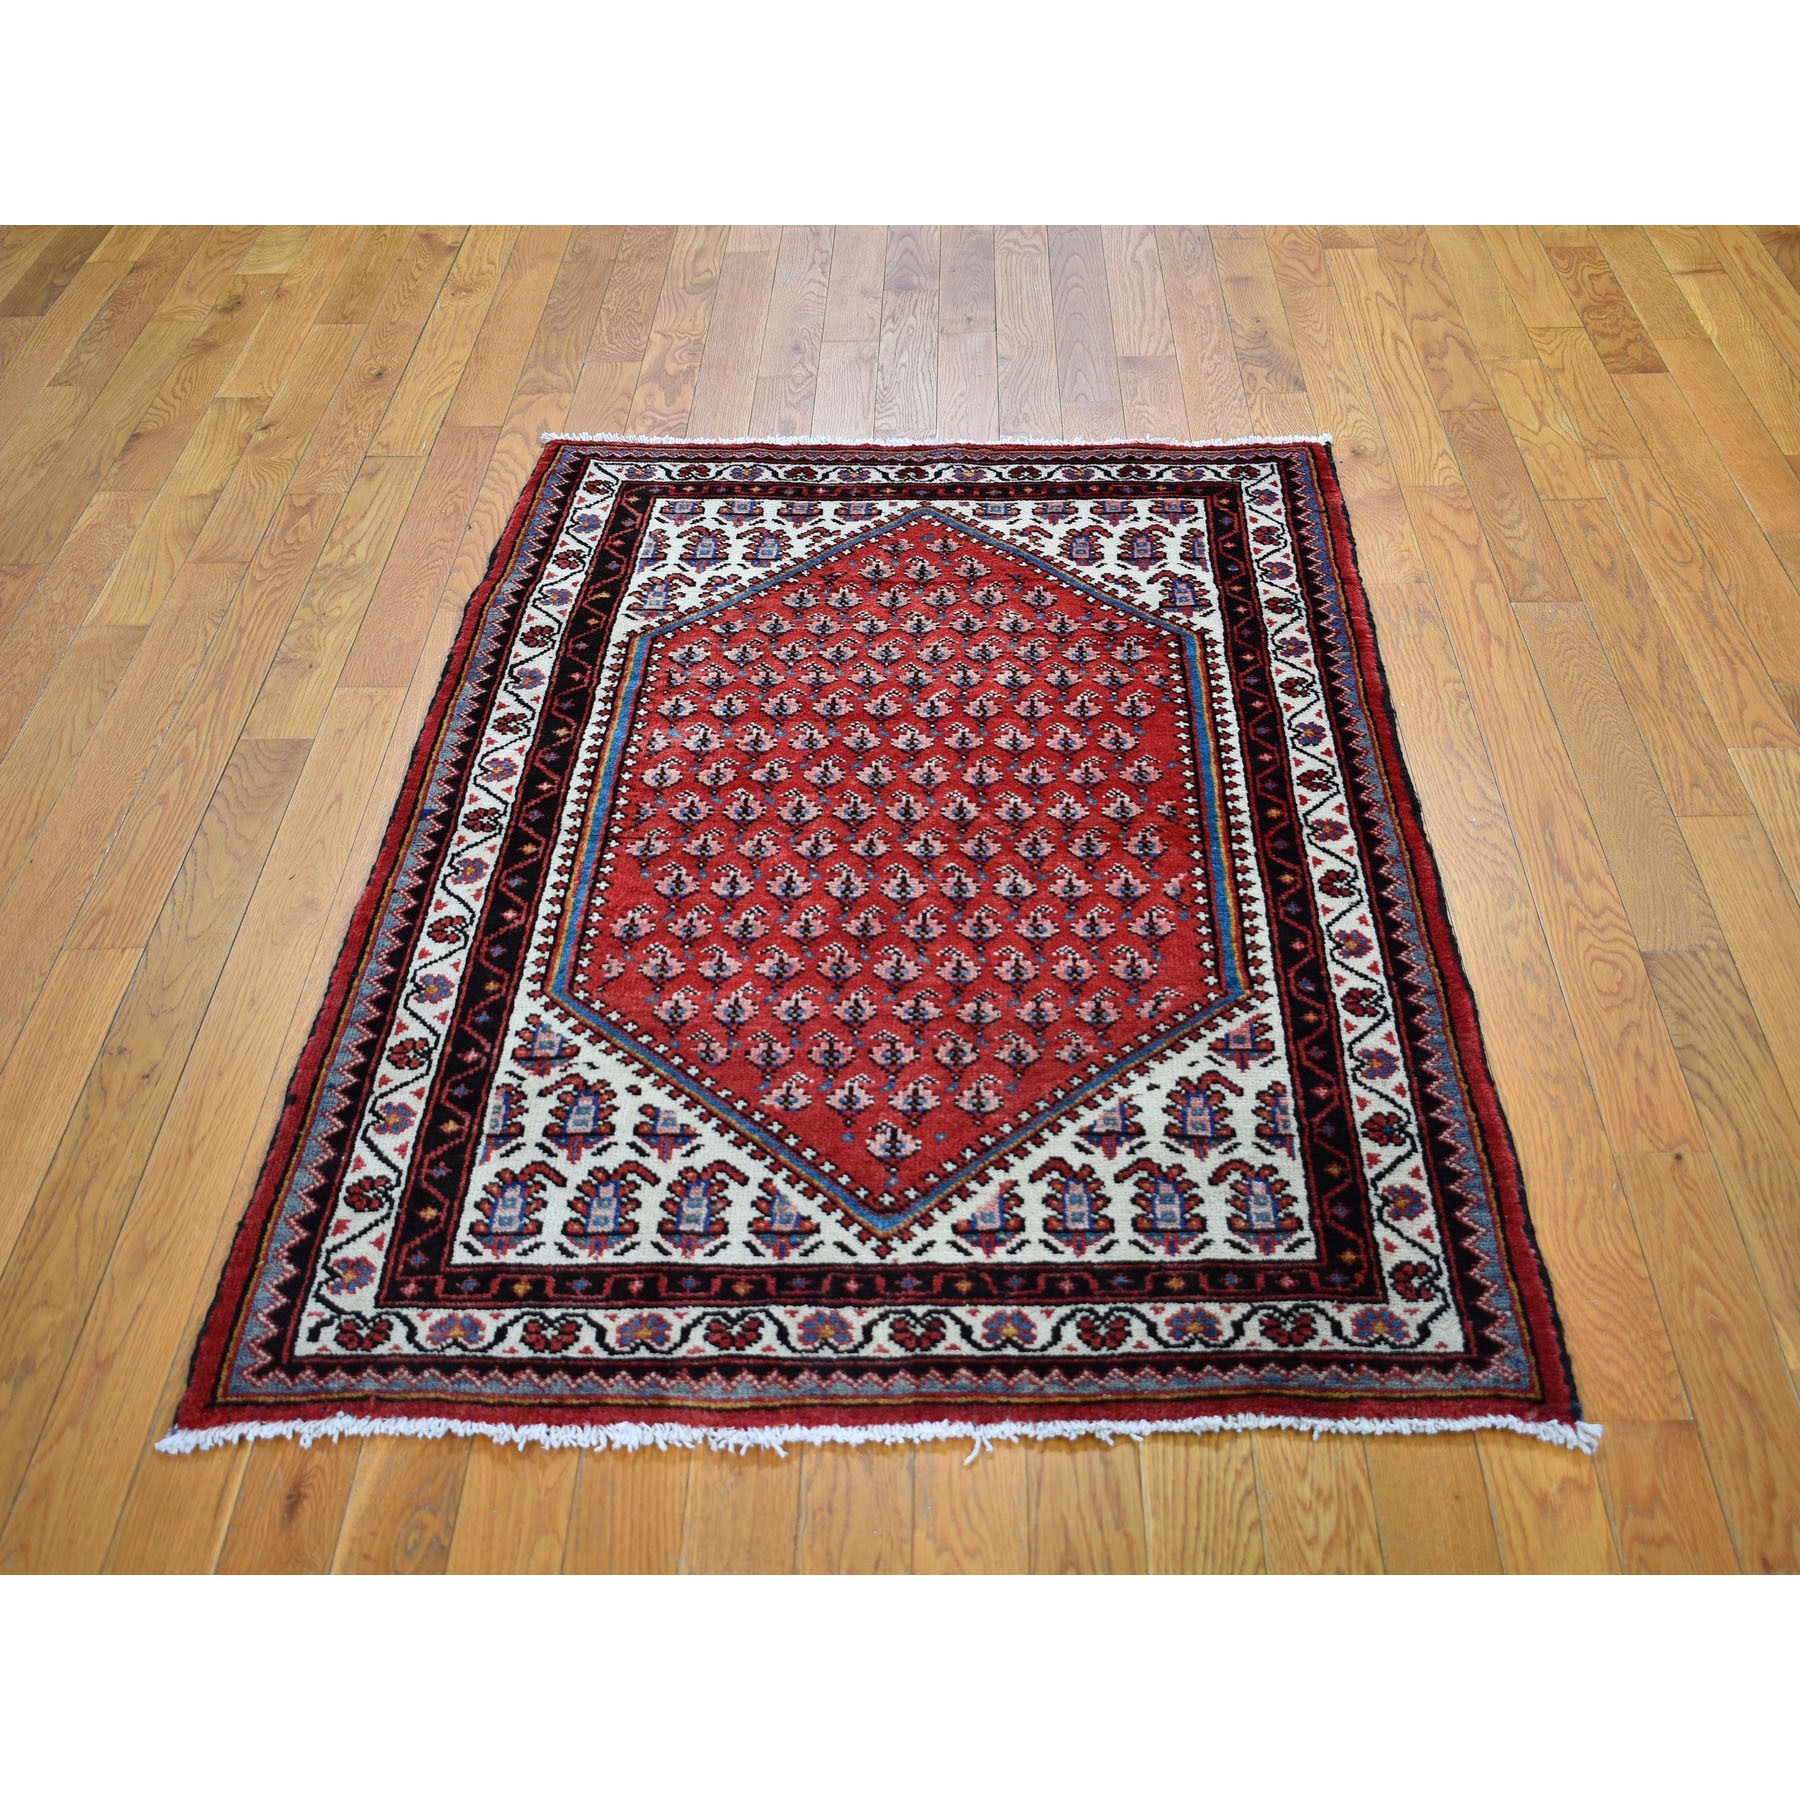 3-5 x5-2   Red Vinatge Pure Wool Sarouk Mir With Boteh Design Hand Knotted Oriental Rug 